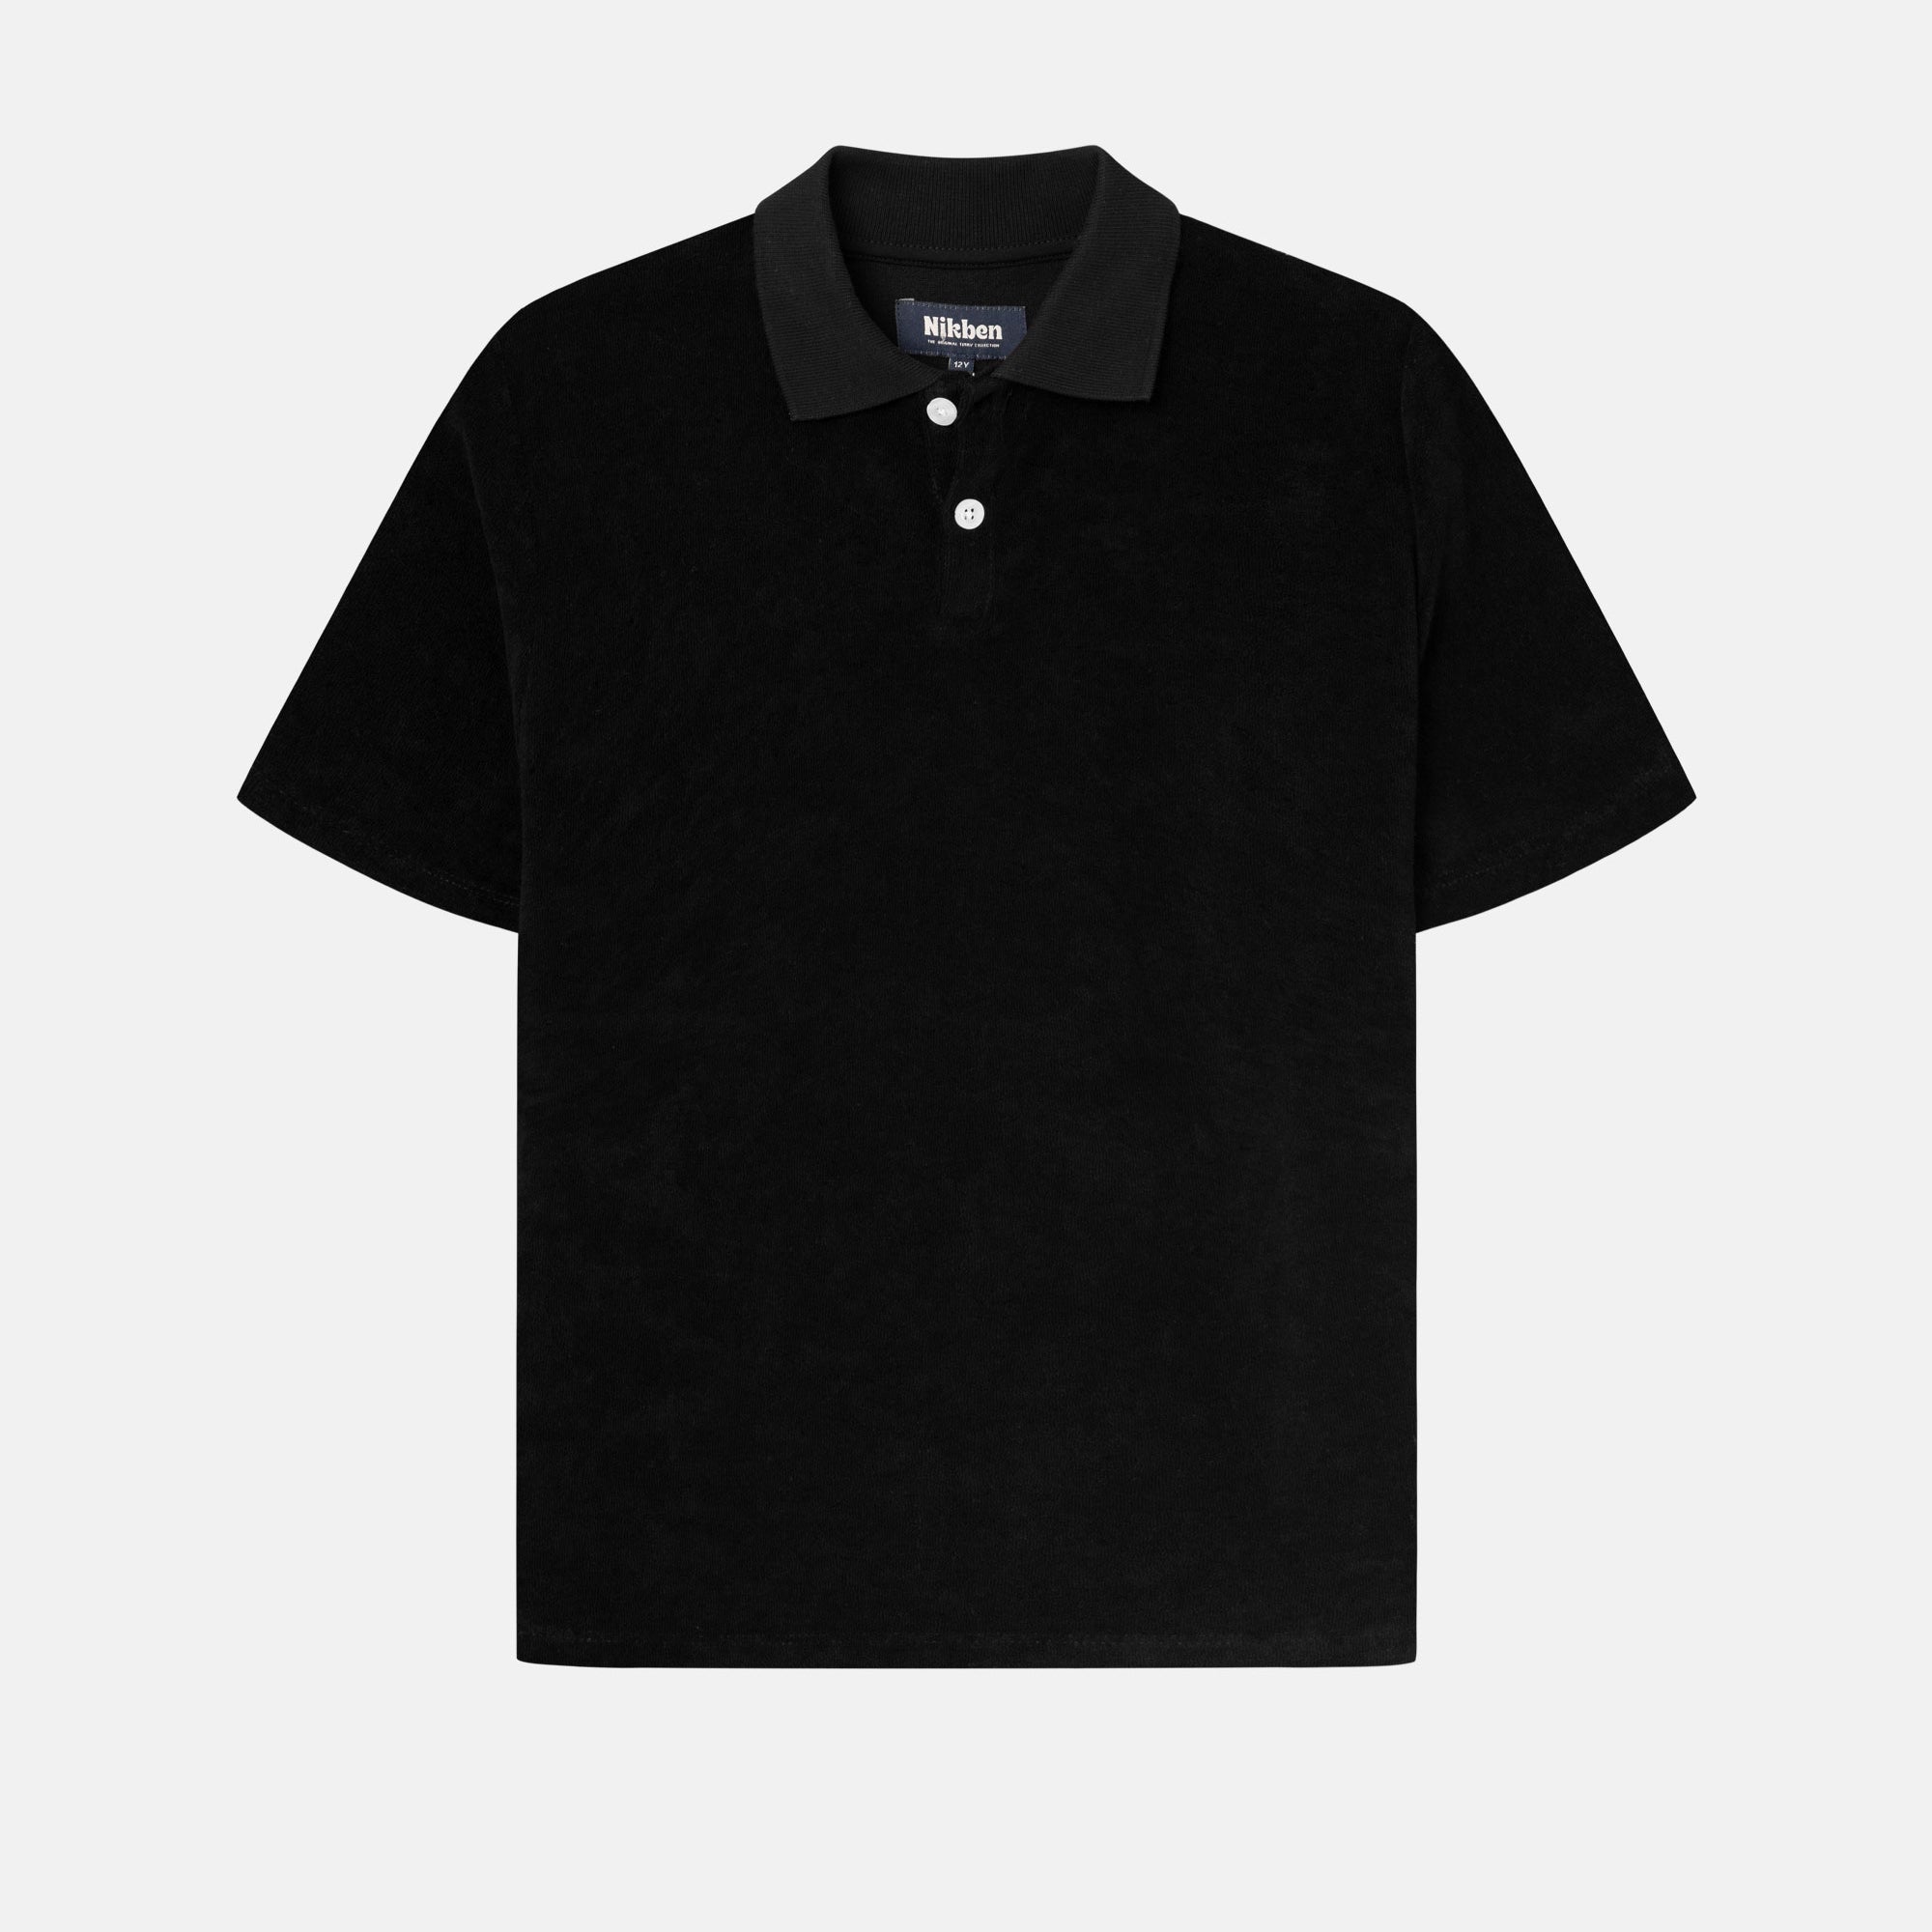 Black short sleeve piké shirt for kids in terry toweling fabric.